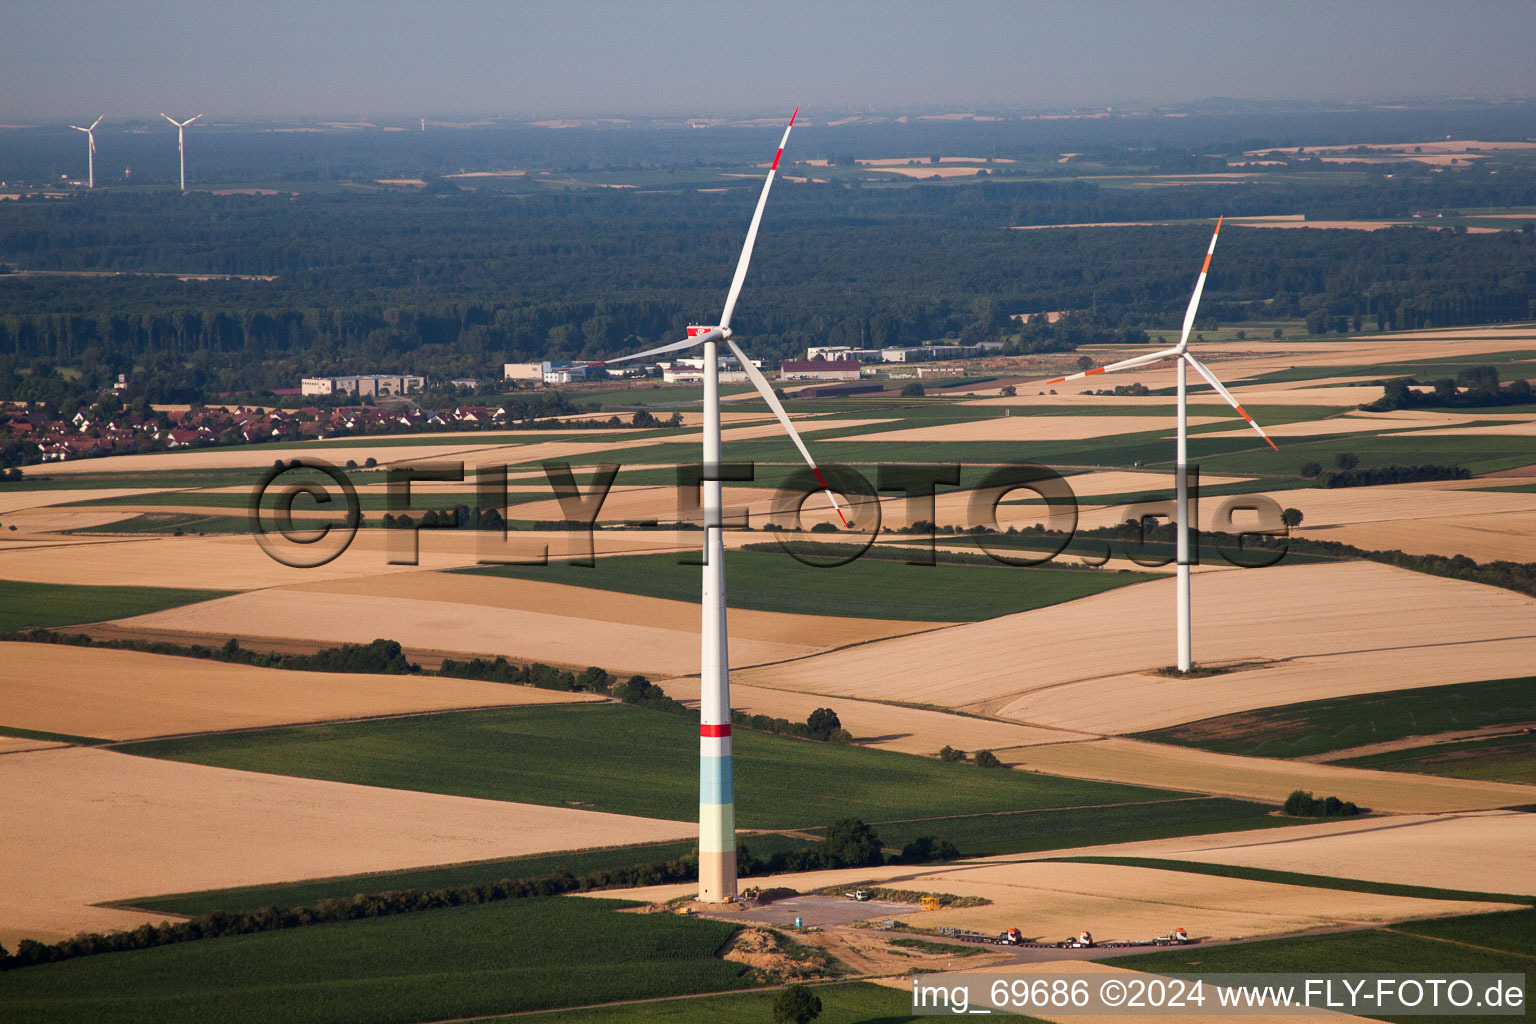 Oblique view of Wind farm construction in Offenbach an der Queich in the state Rhineland-Palatinate, Germany